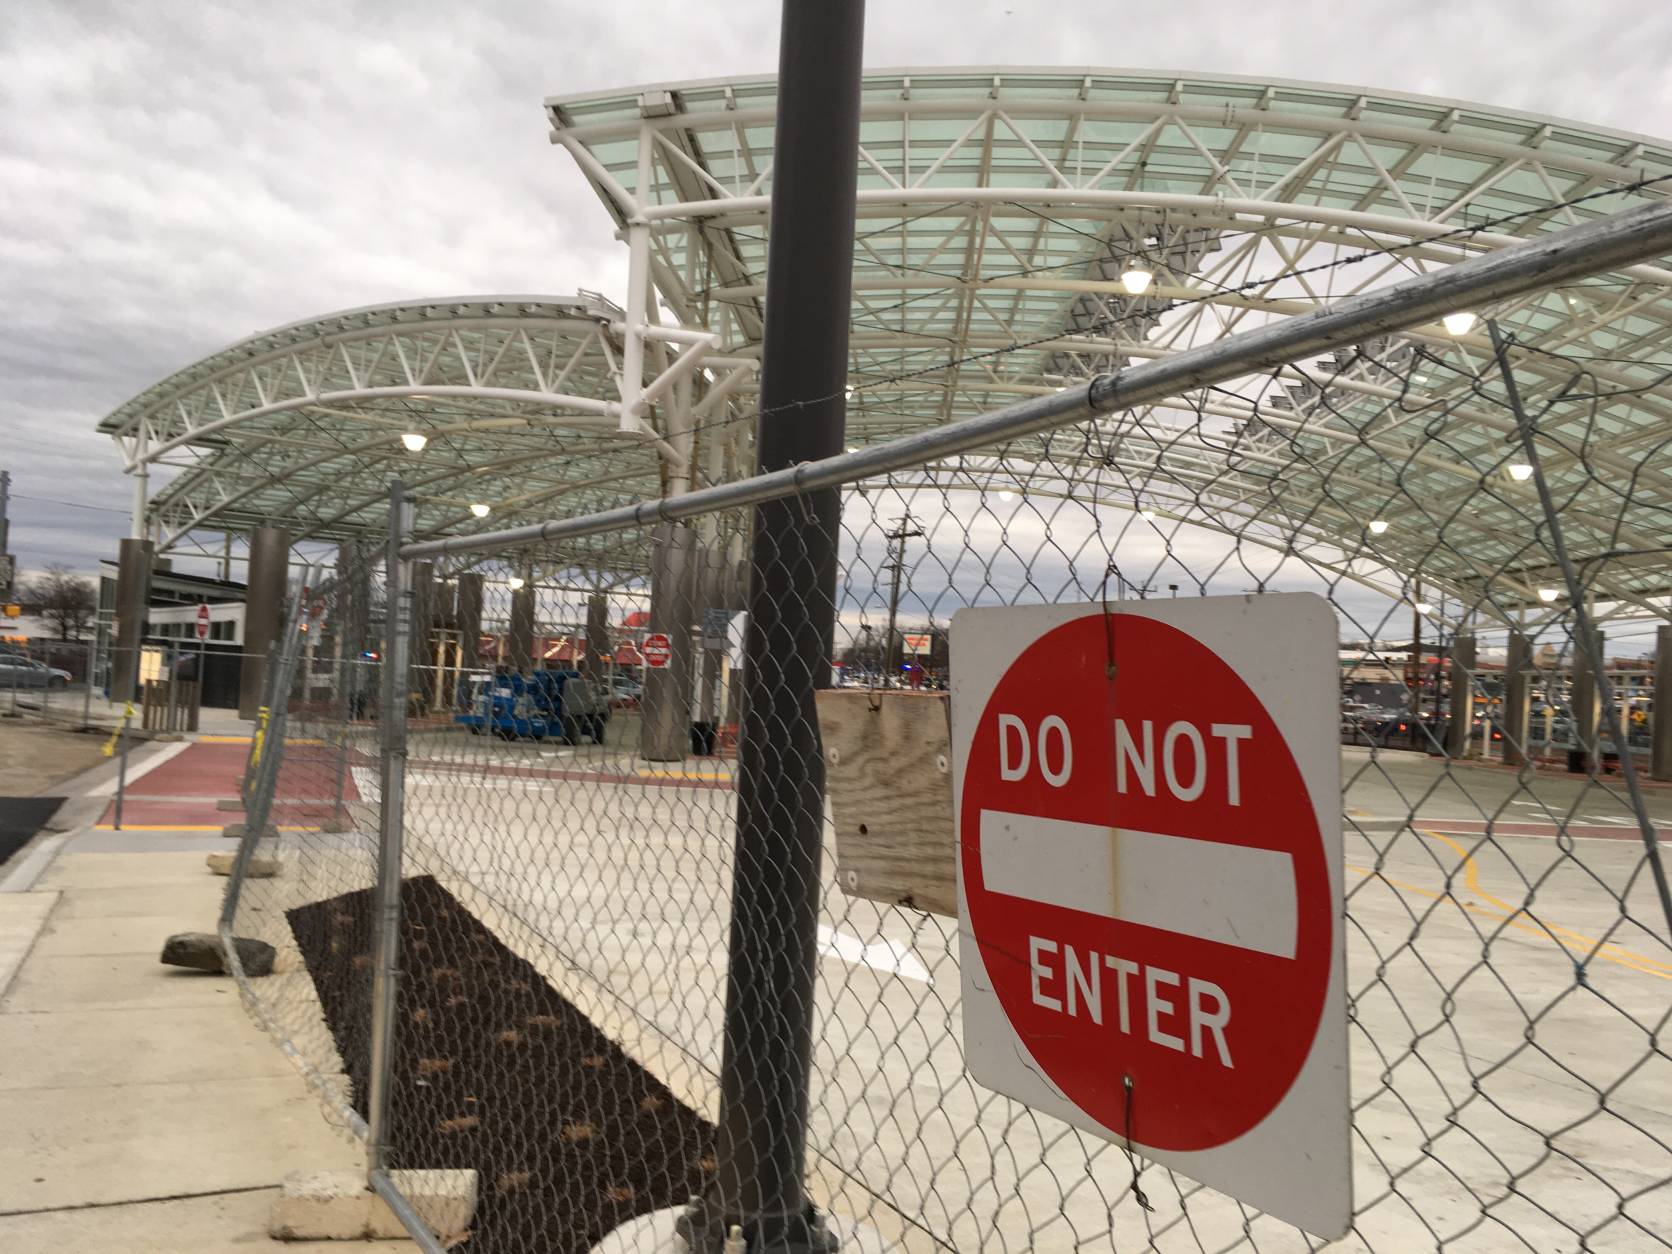 The new transit center in the Langley Park area is expected to serve 12,000 customers each day and will collect some nearby bus stops under its canopy. (WTOP/Liz Anderson)